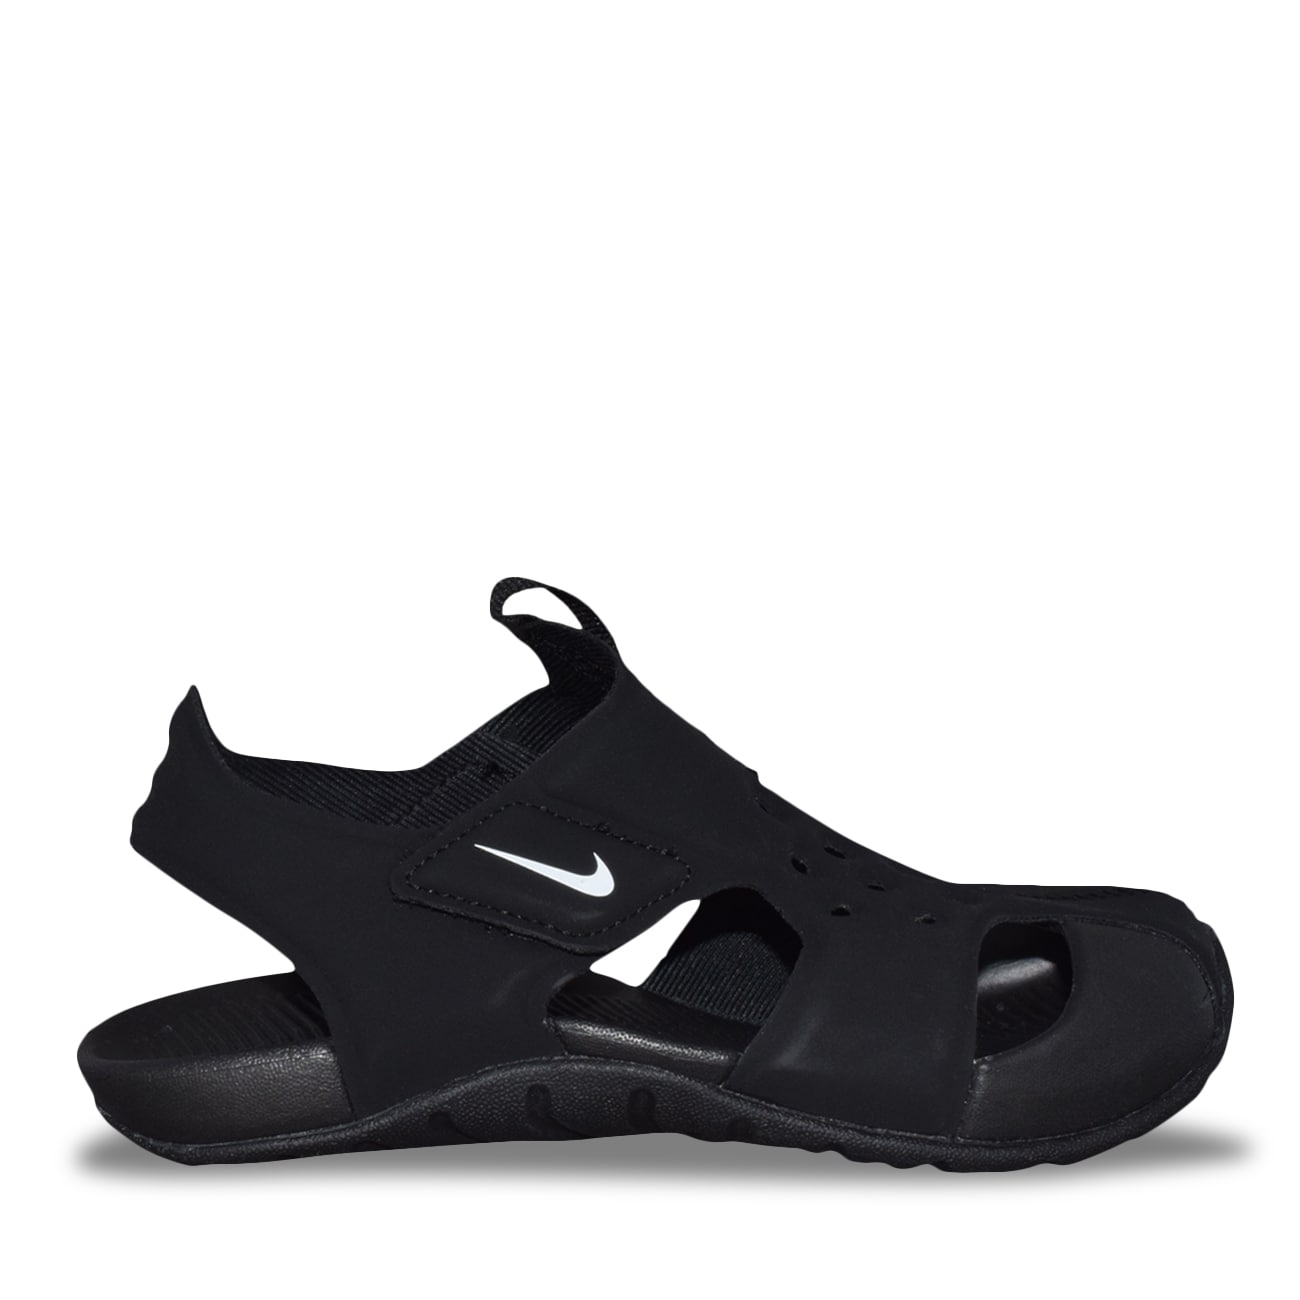 nike sunray protect 2 boys strap sandals